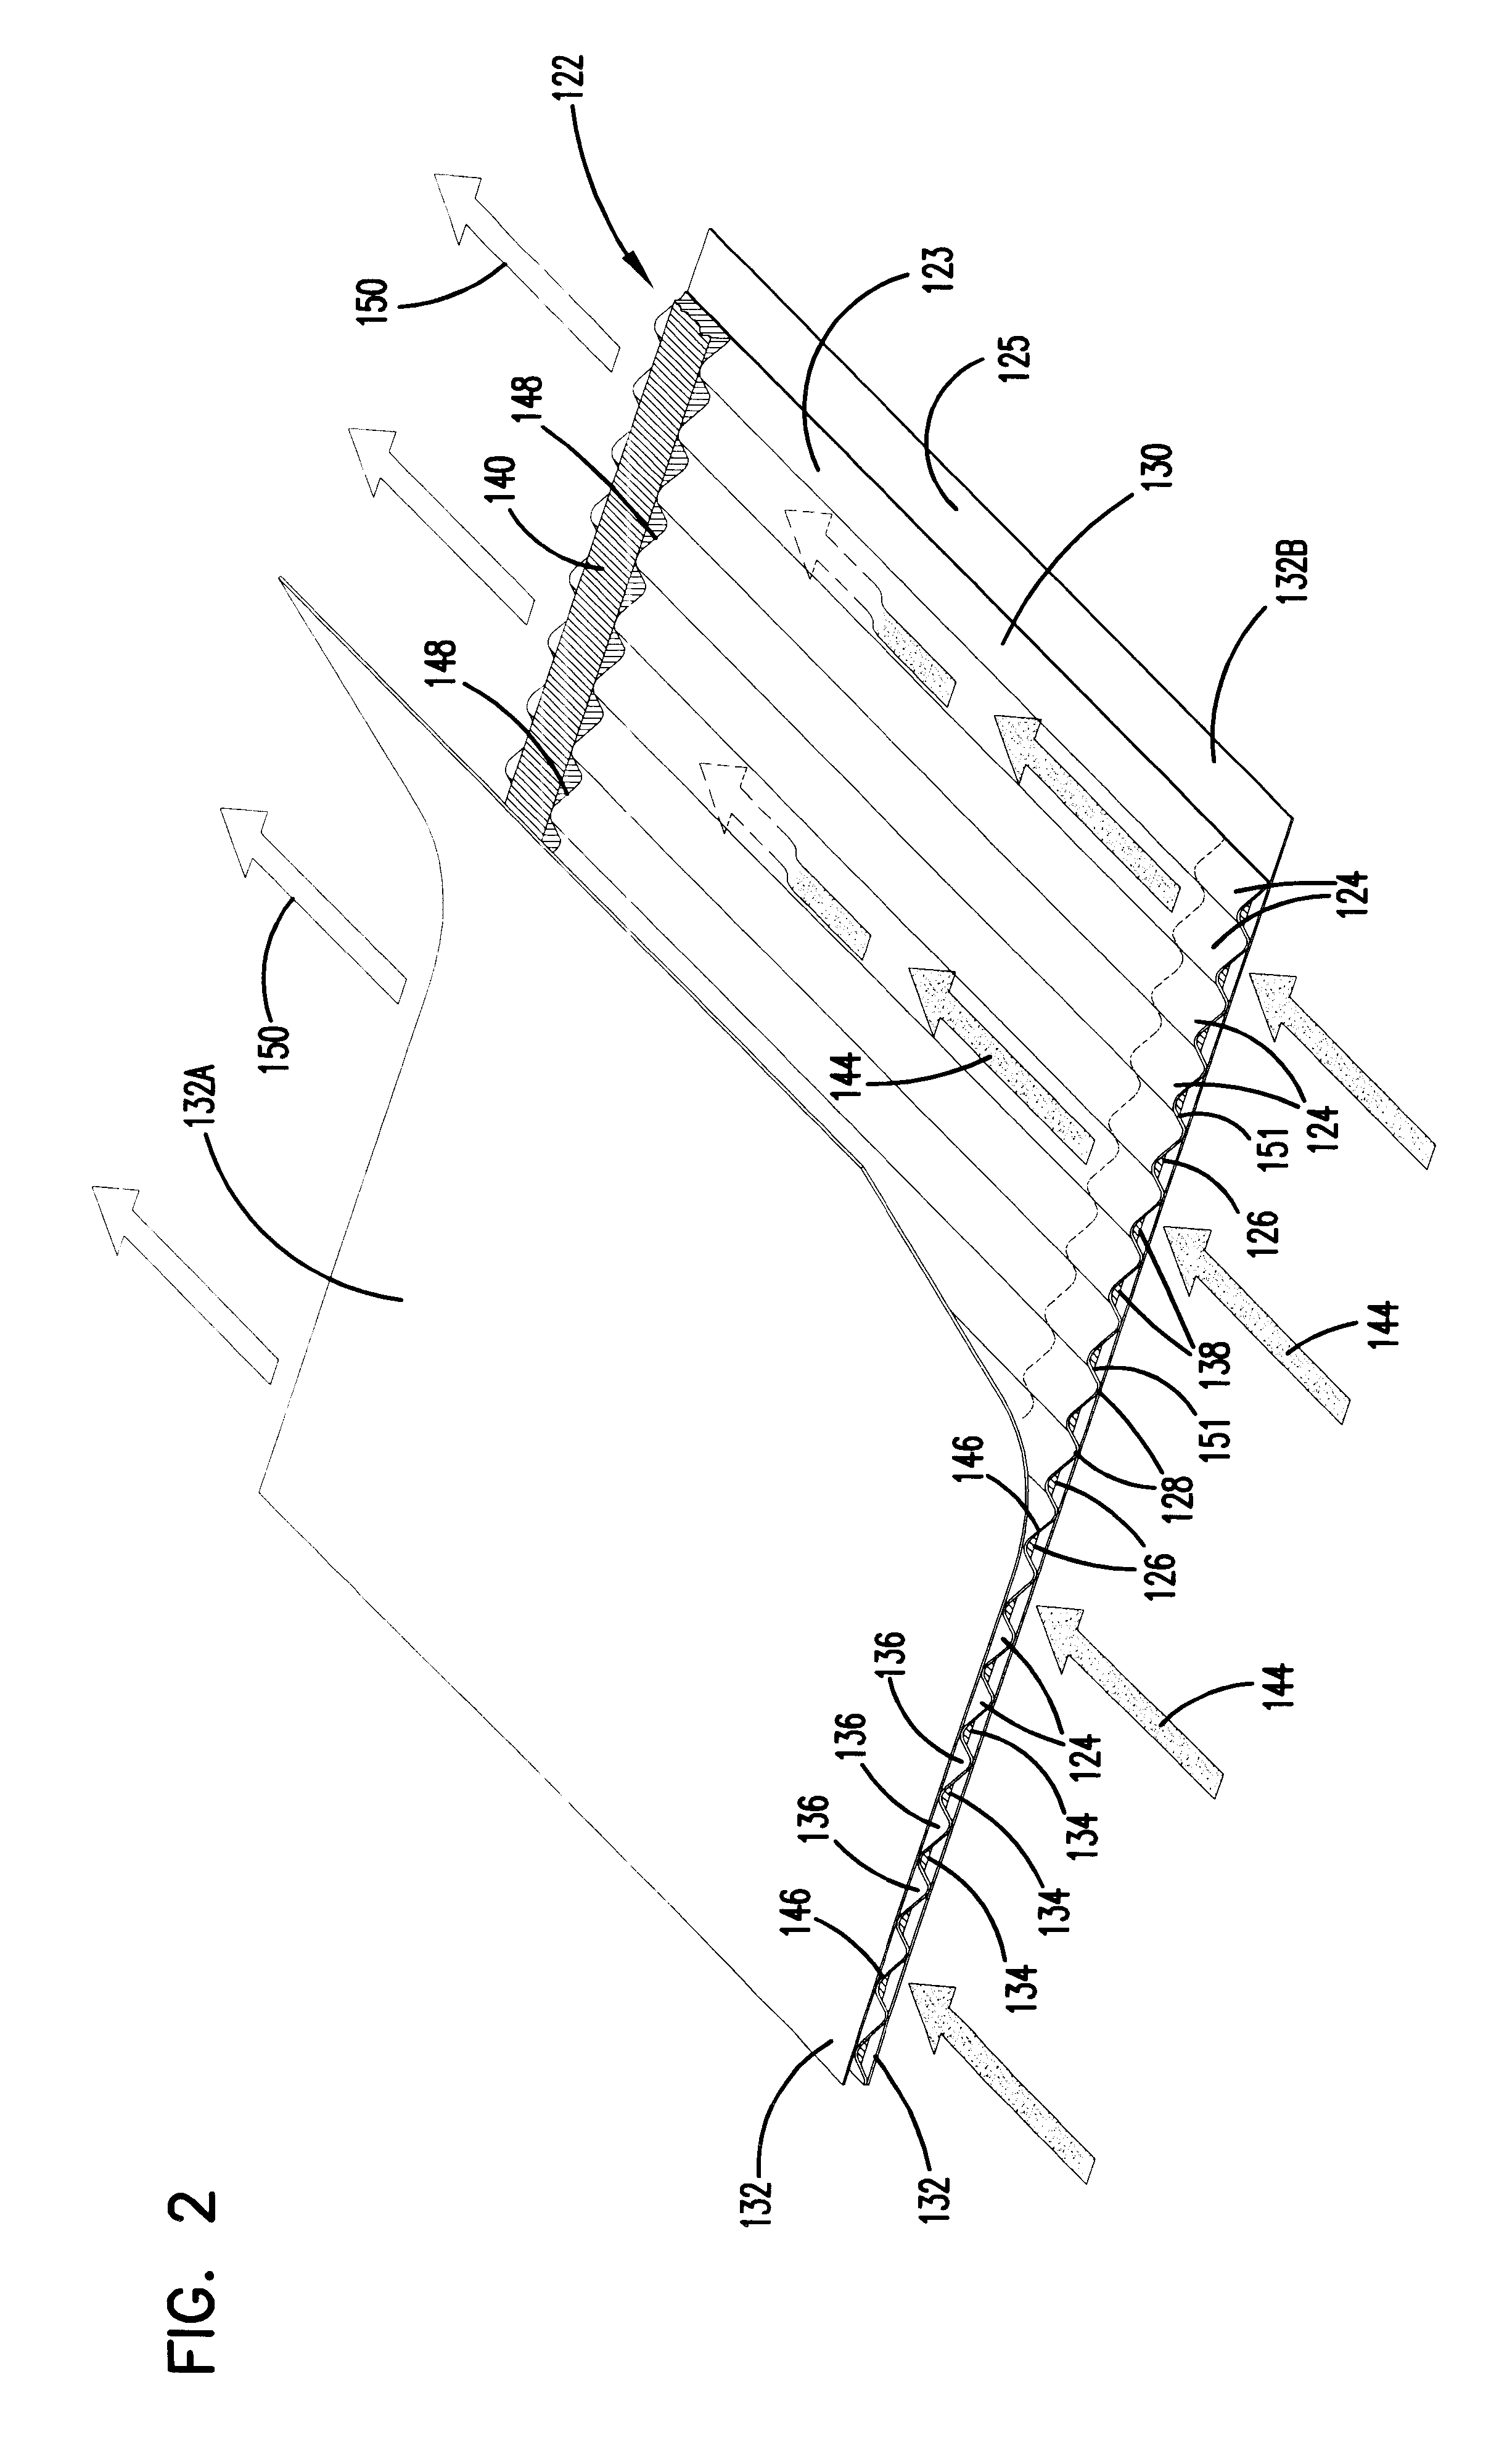 Filter element incorporating a handle member